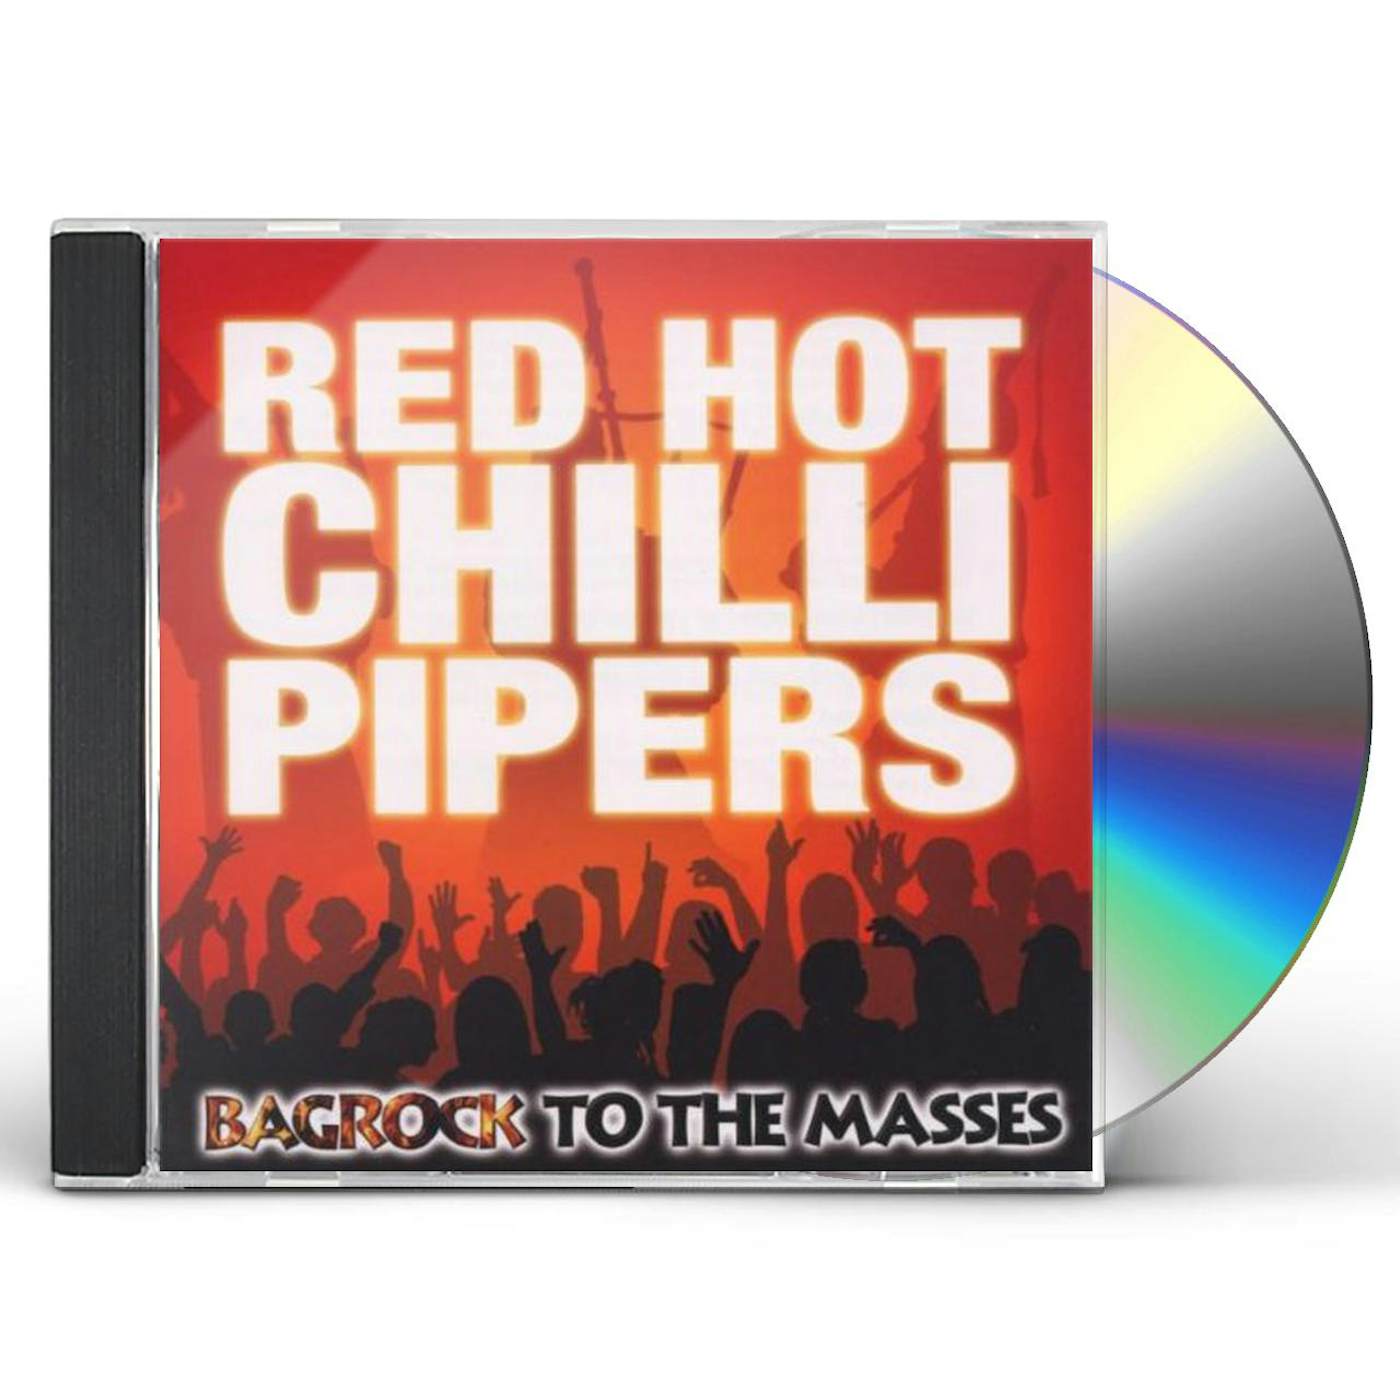 Red Hot Chilli Pipers BAGROCK TO THE MASSES CD